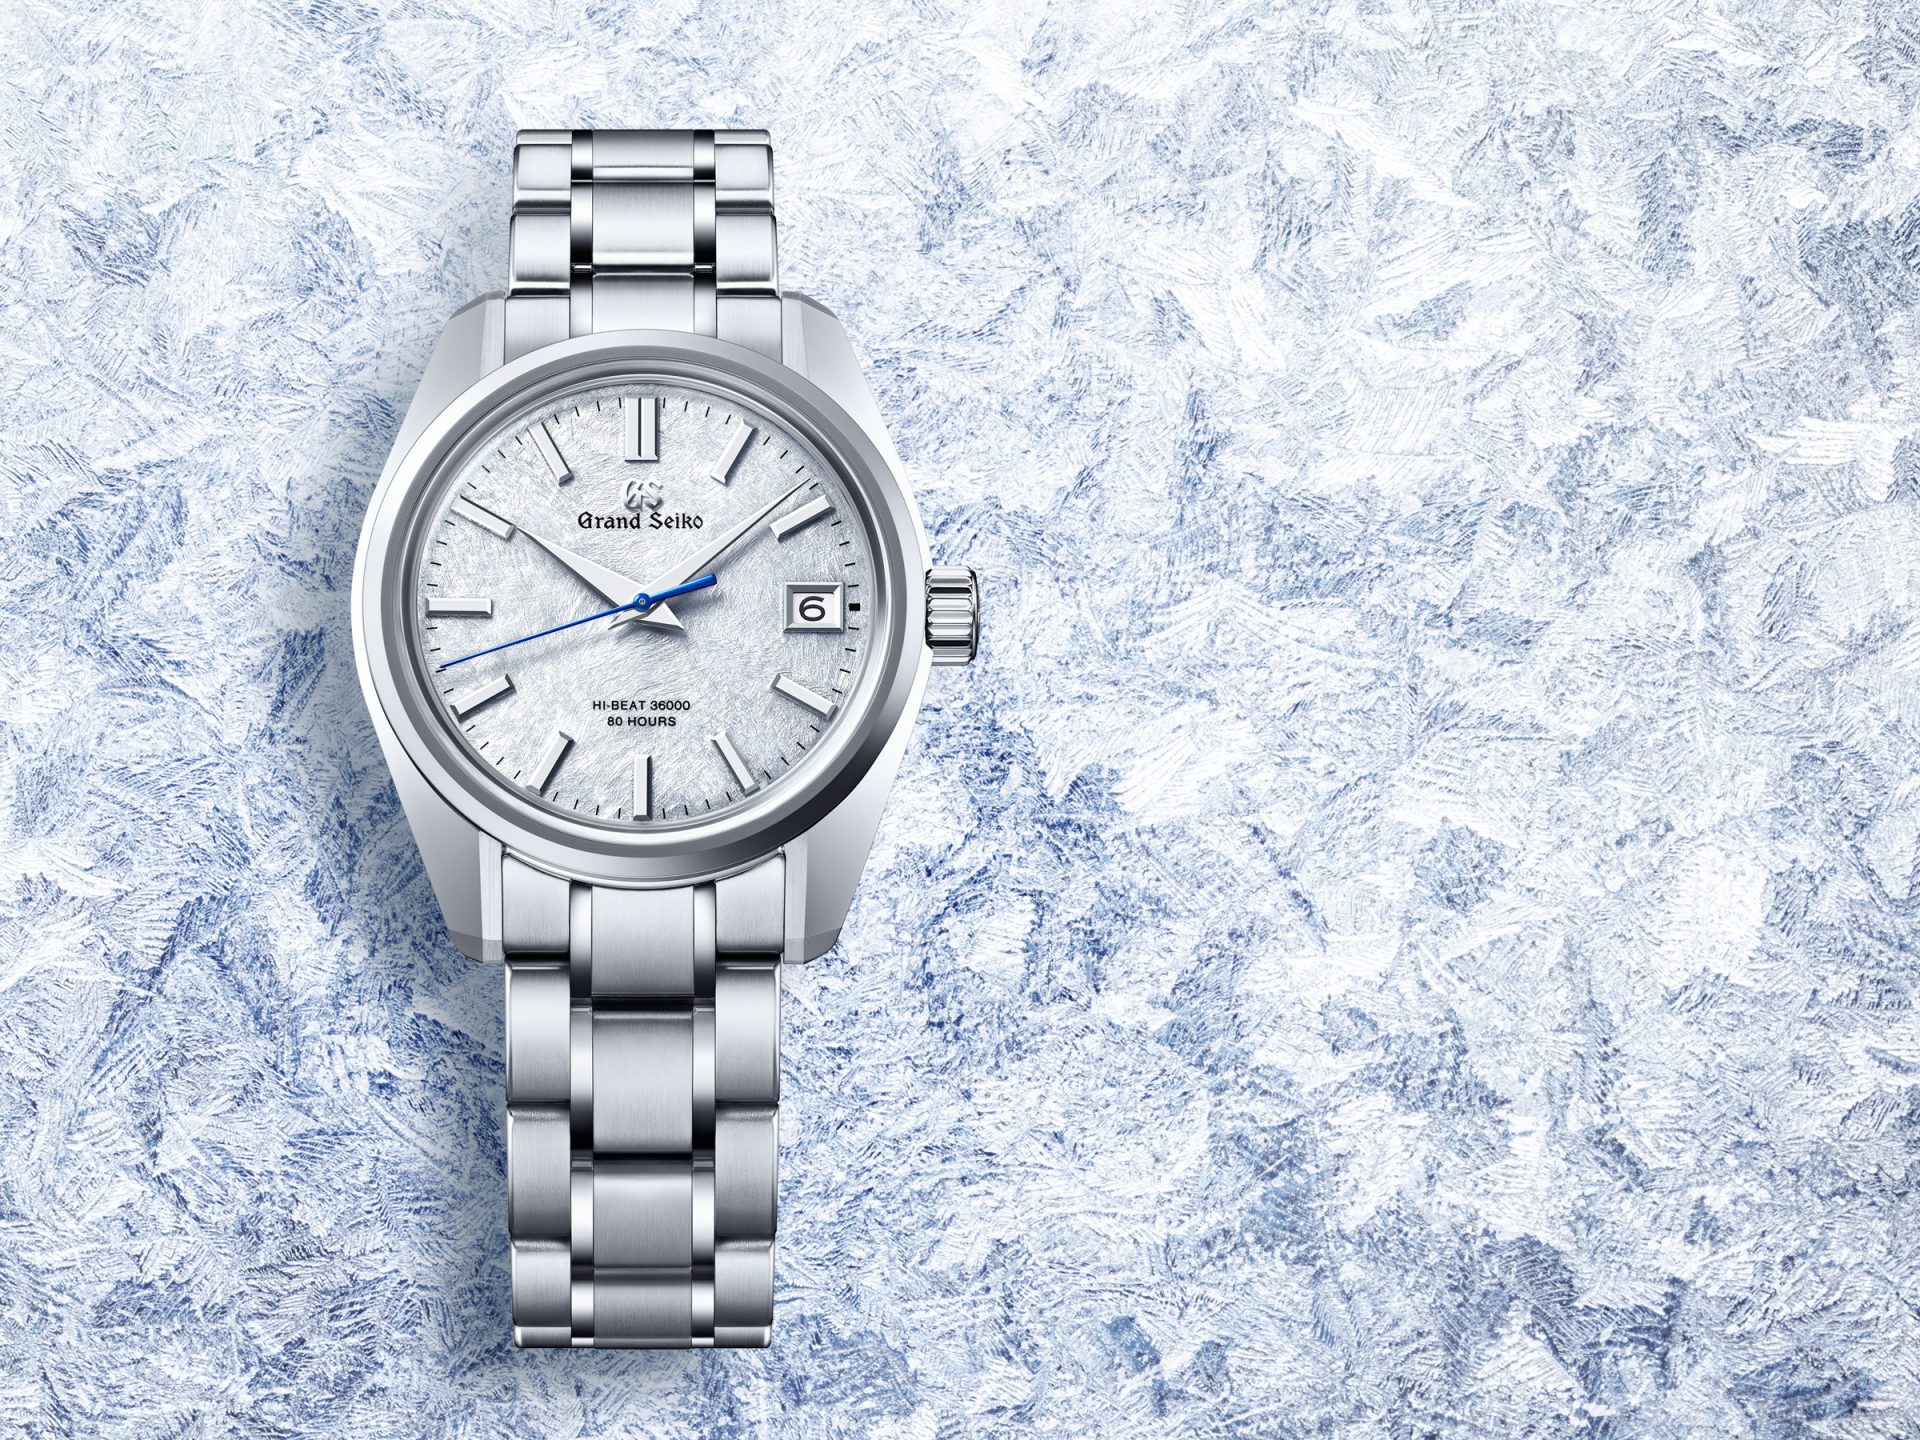 Grand Seiko Creates A Snowscape Dial For Its Latest Hi-Beat 44GS Watch